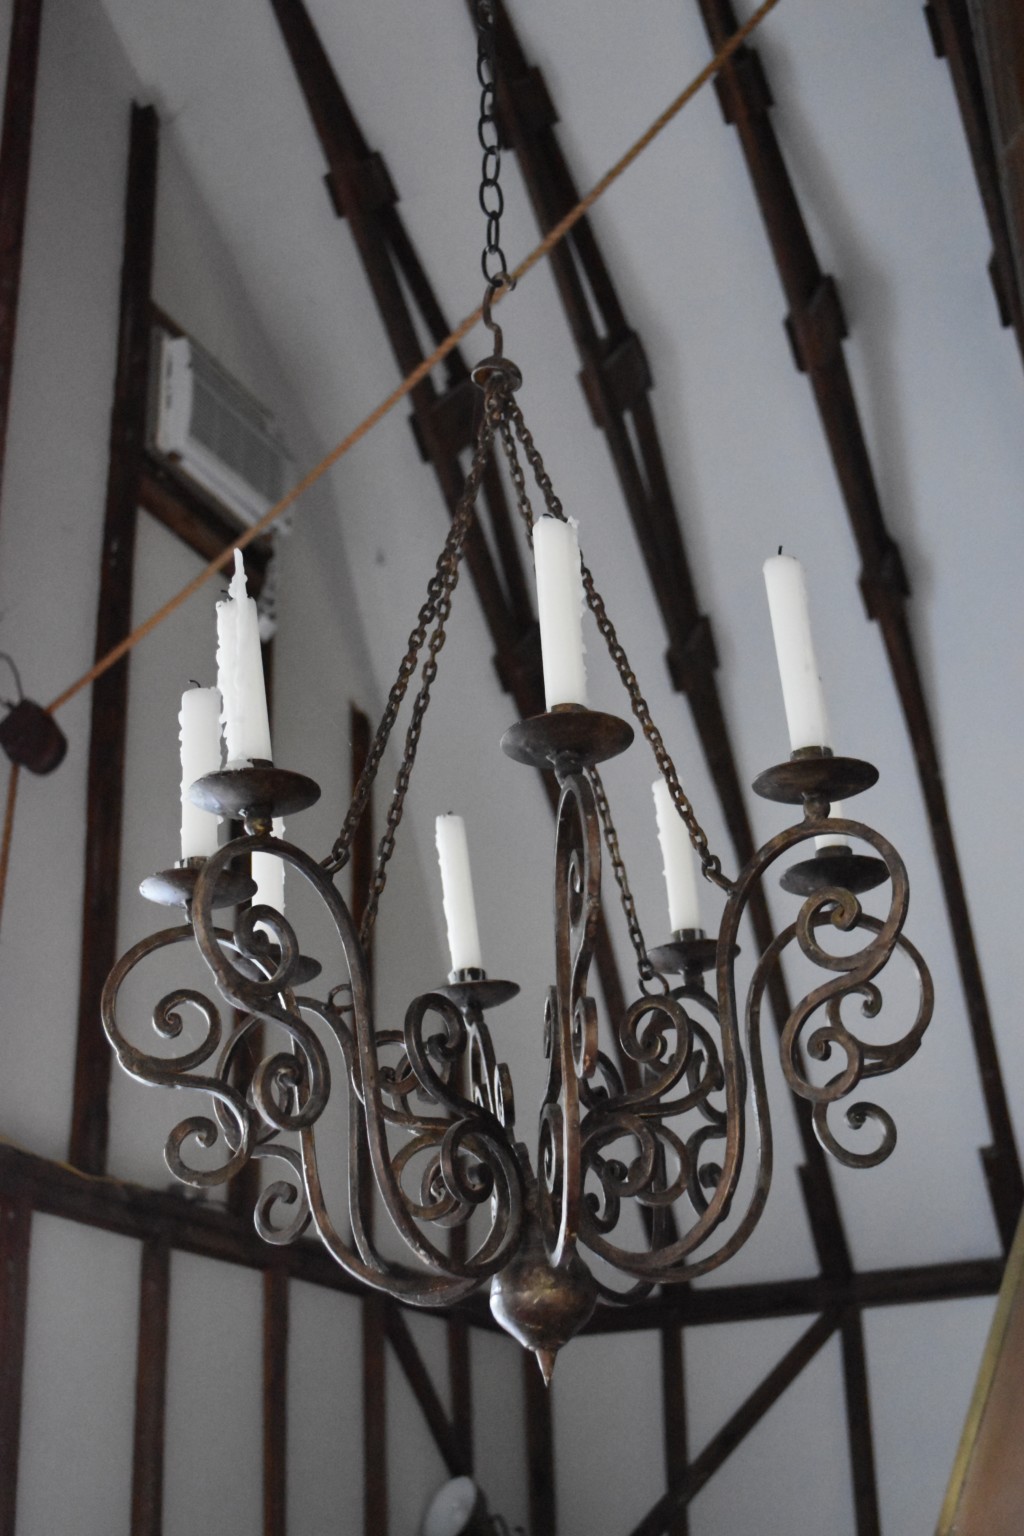 This pretty iron chandelier hangs by a heavy iron chain from the lofty ceiling. No electricity needed, these candles are old school. Love it.